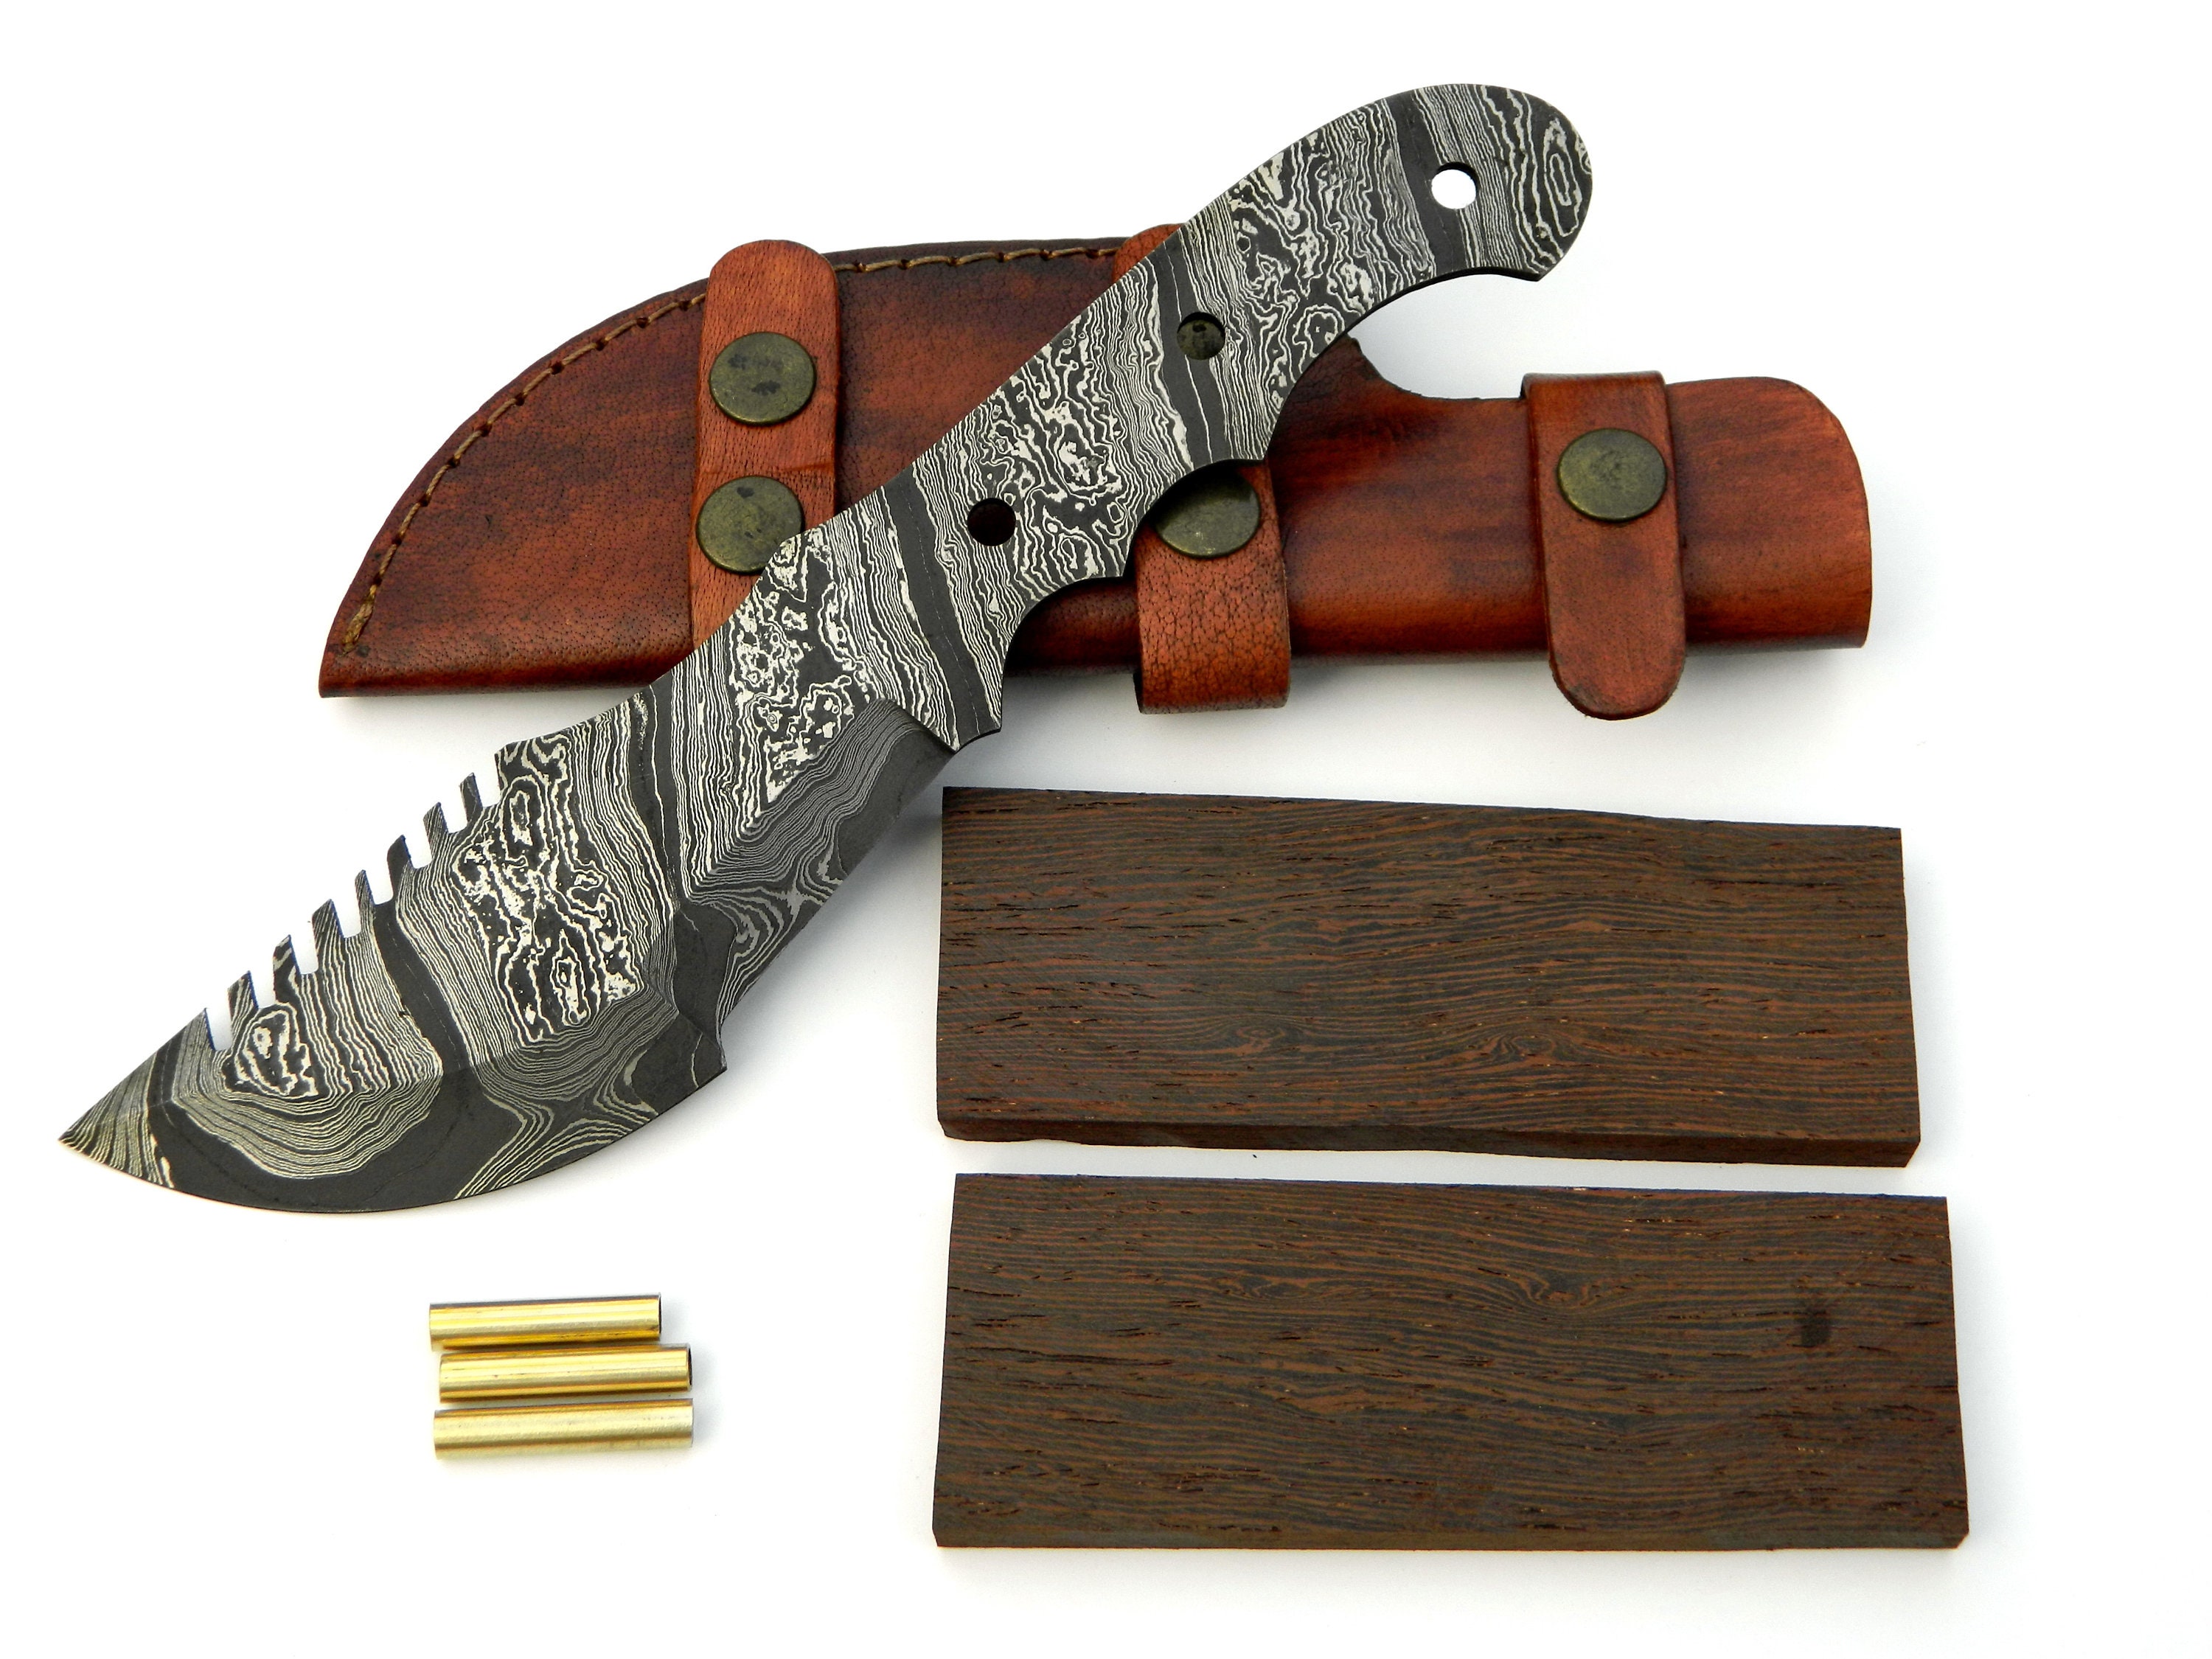 Damascus Knife Making Kit DIY Handmade Damascus Steel Includes Blank Blade,  Pins, Leather Sheath, Handle Scales Knife Making Supplies NB113 